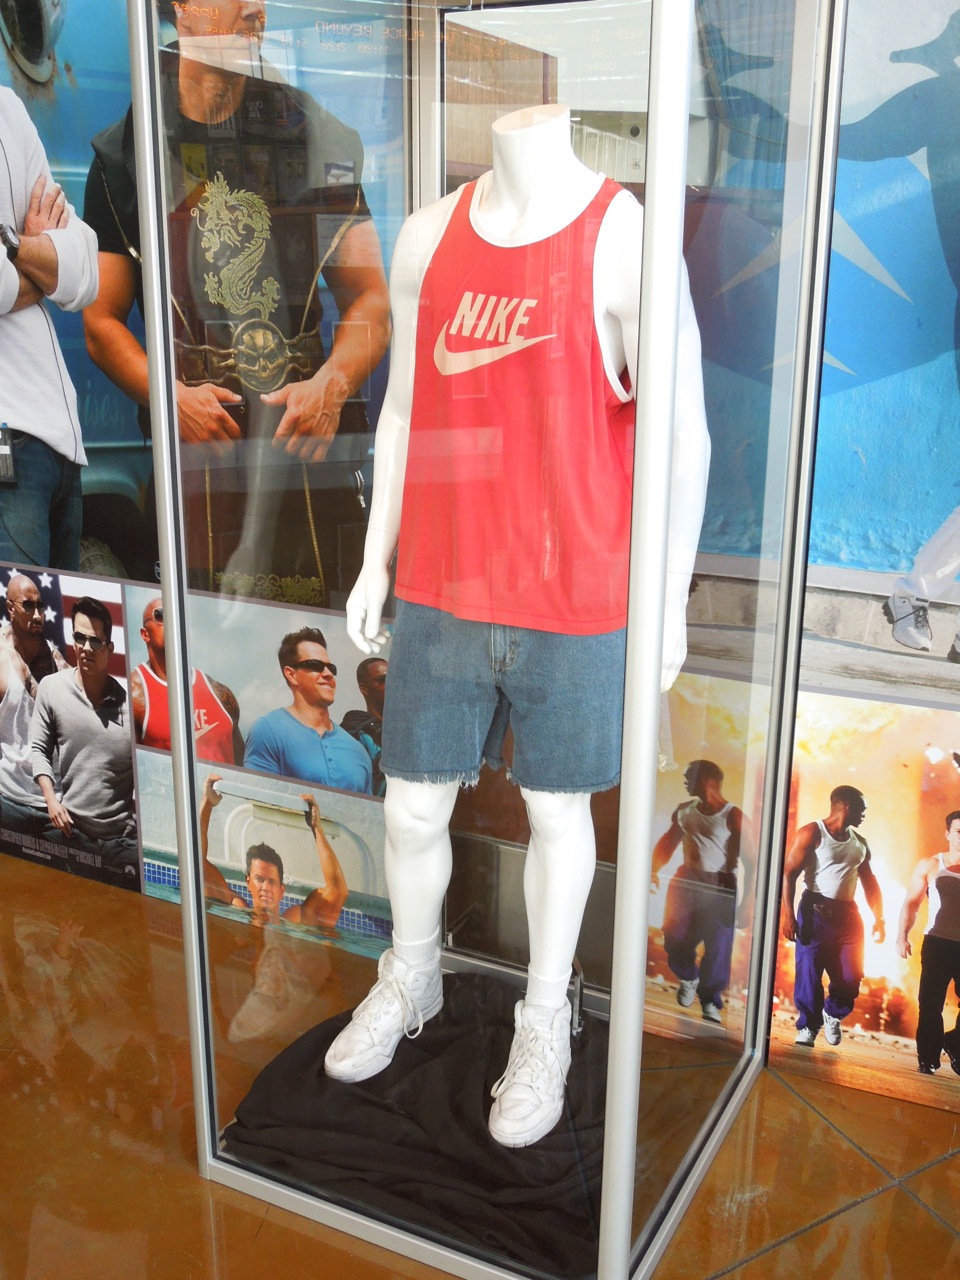 Hollywood Movie Costumes and Props: Pain & Gain worn by Mark Wahlberg, Dwayne Johnson and Mackie...